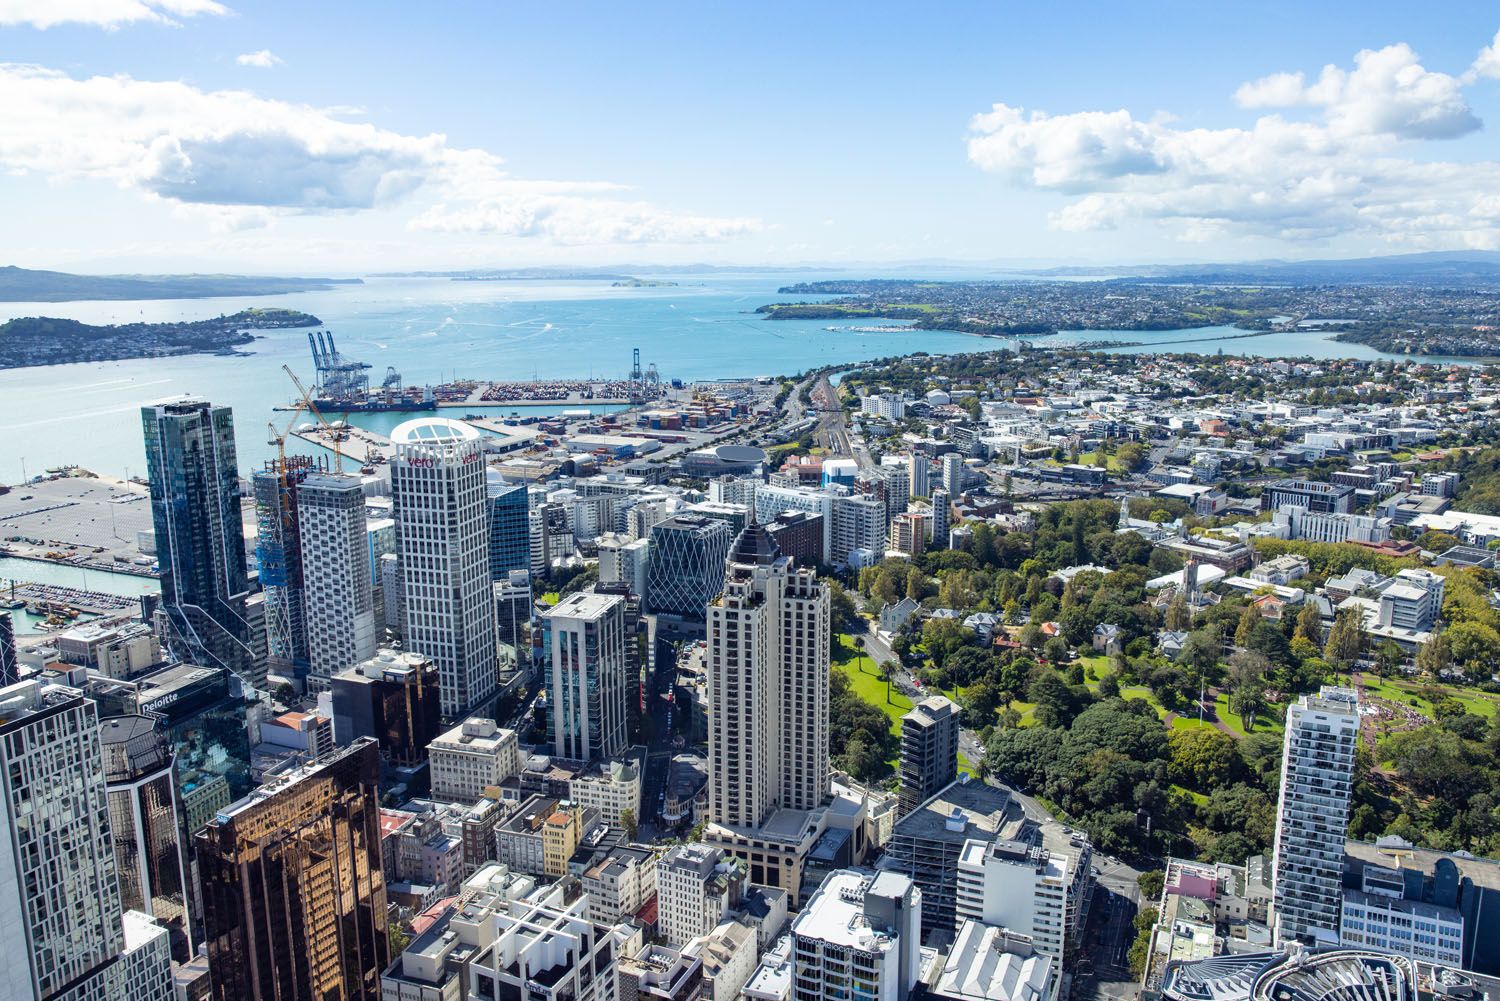 Hauraki Gulf Auckland | Best Things to do in Auckland